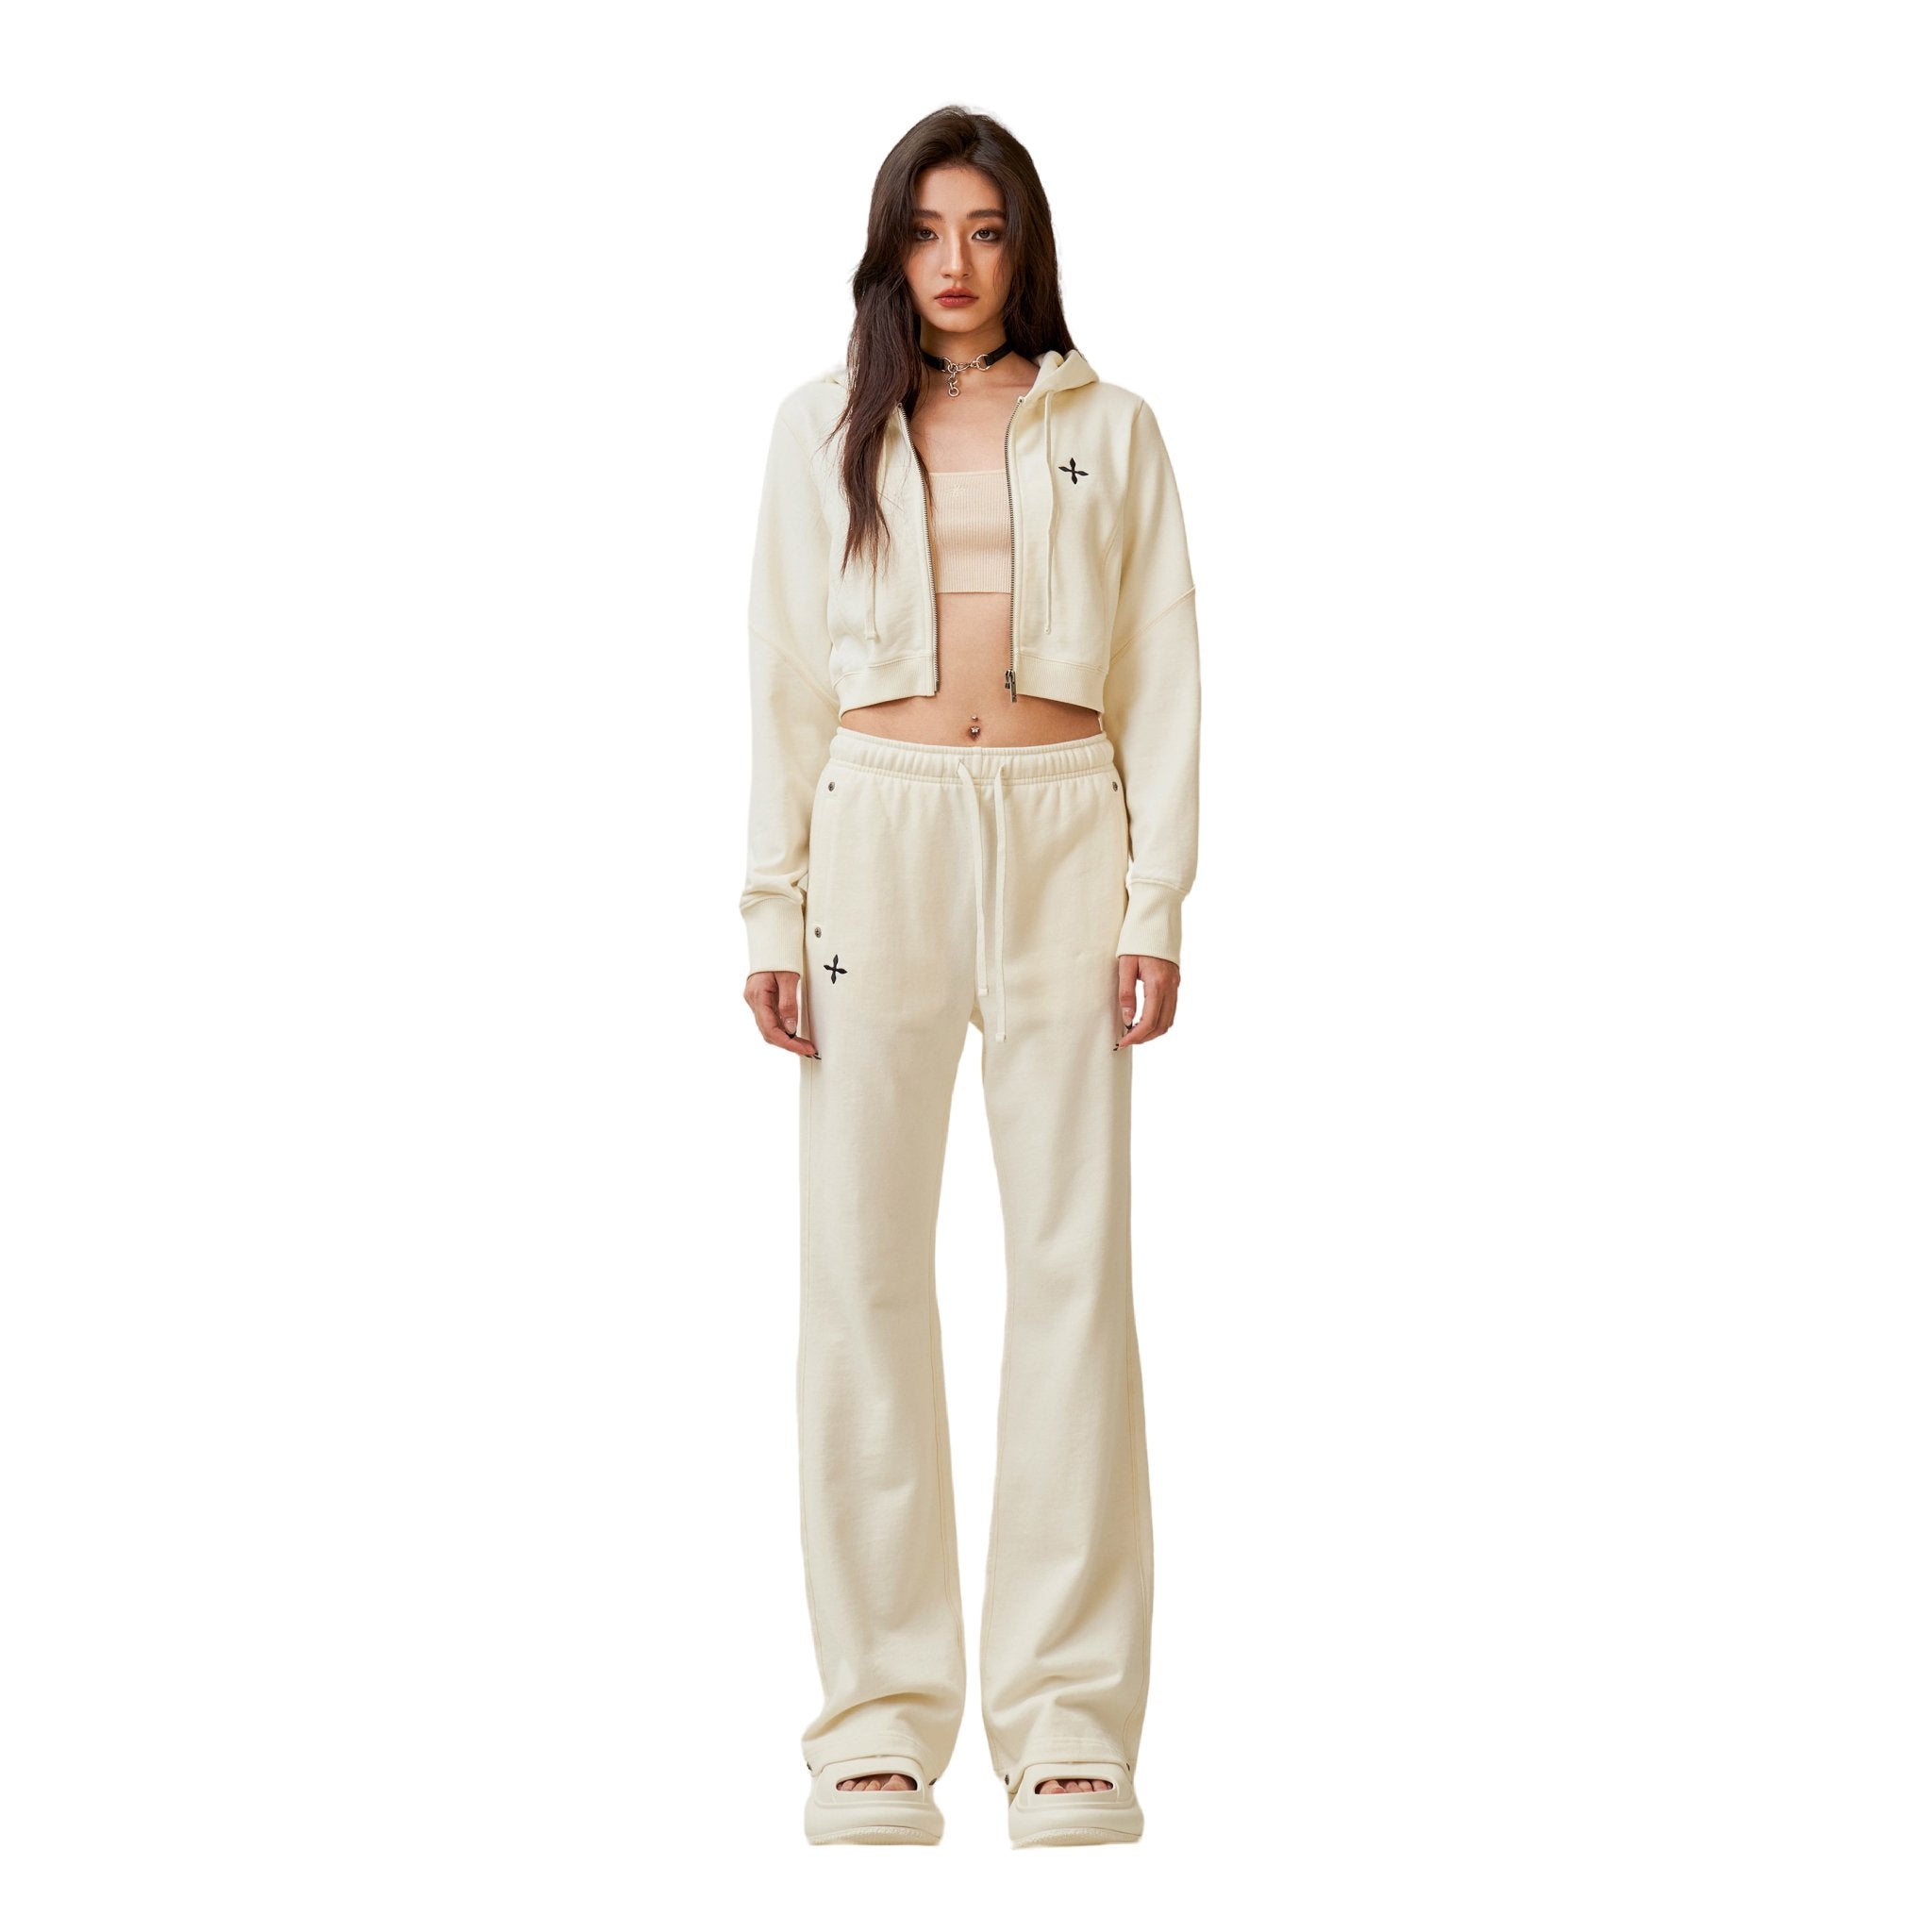 SMFK Compass Rove Jogging Sport Suit In White | MADA IN CHINA